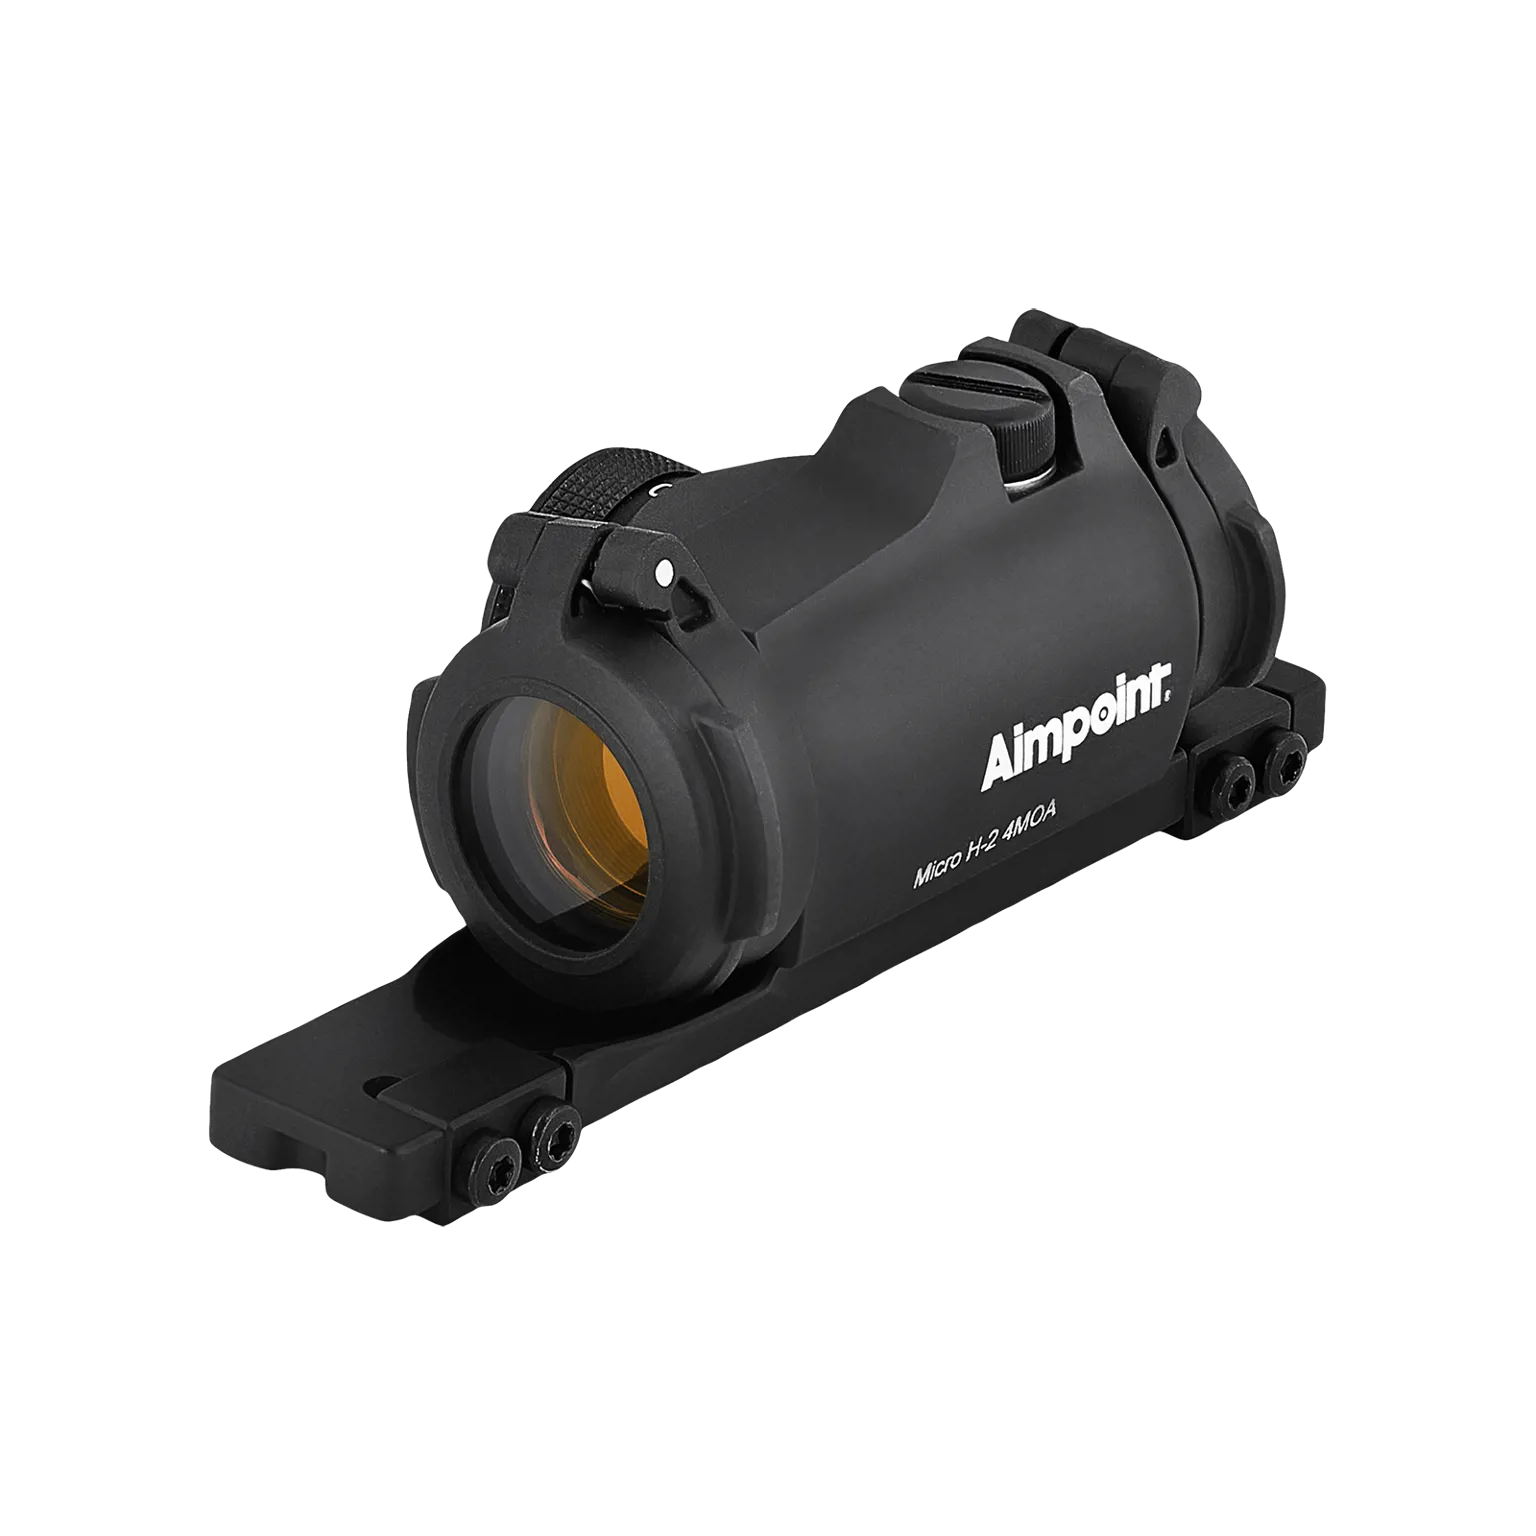 Micro H-2™ 4 MOA - Red dot reflex sight with mount for semi-automatic shotguns - 2